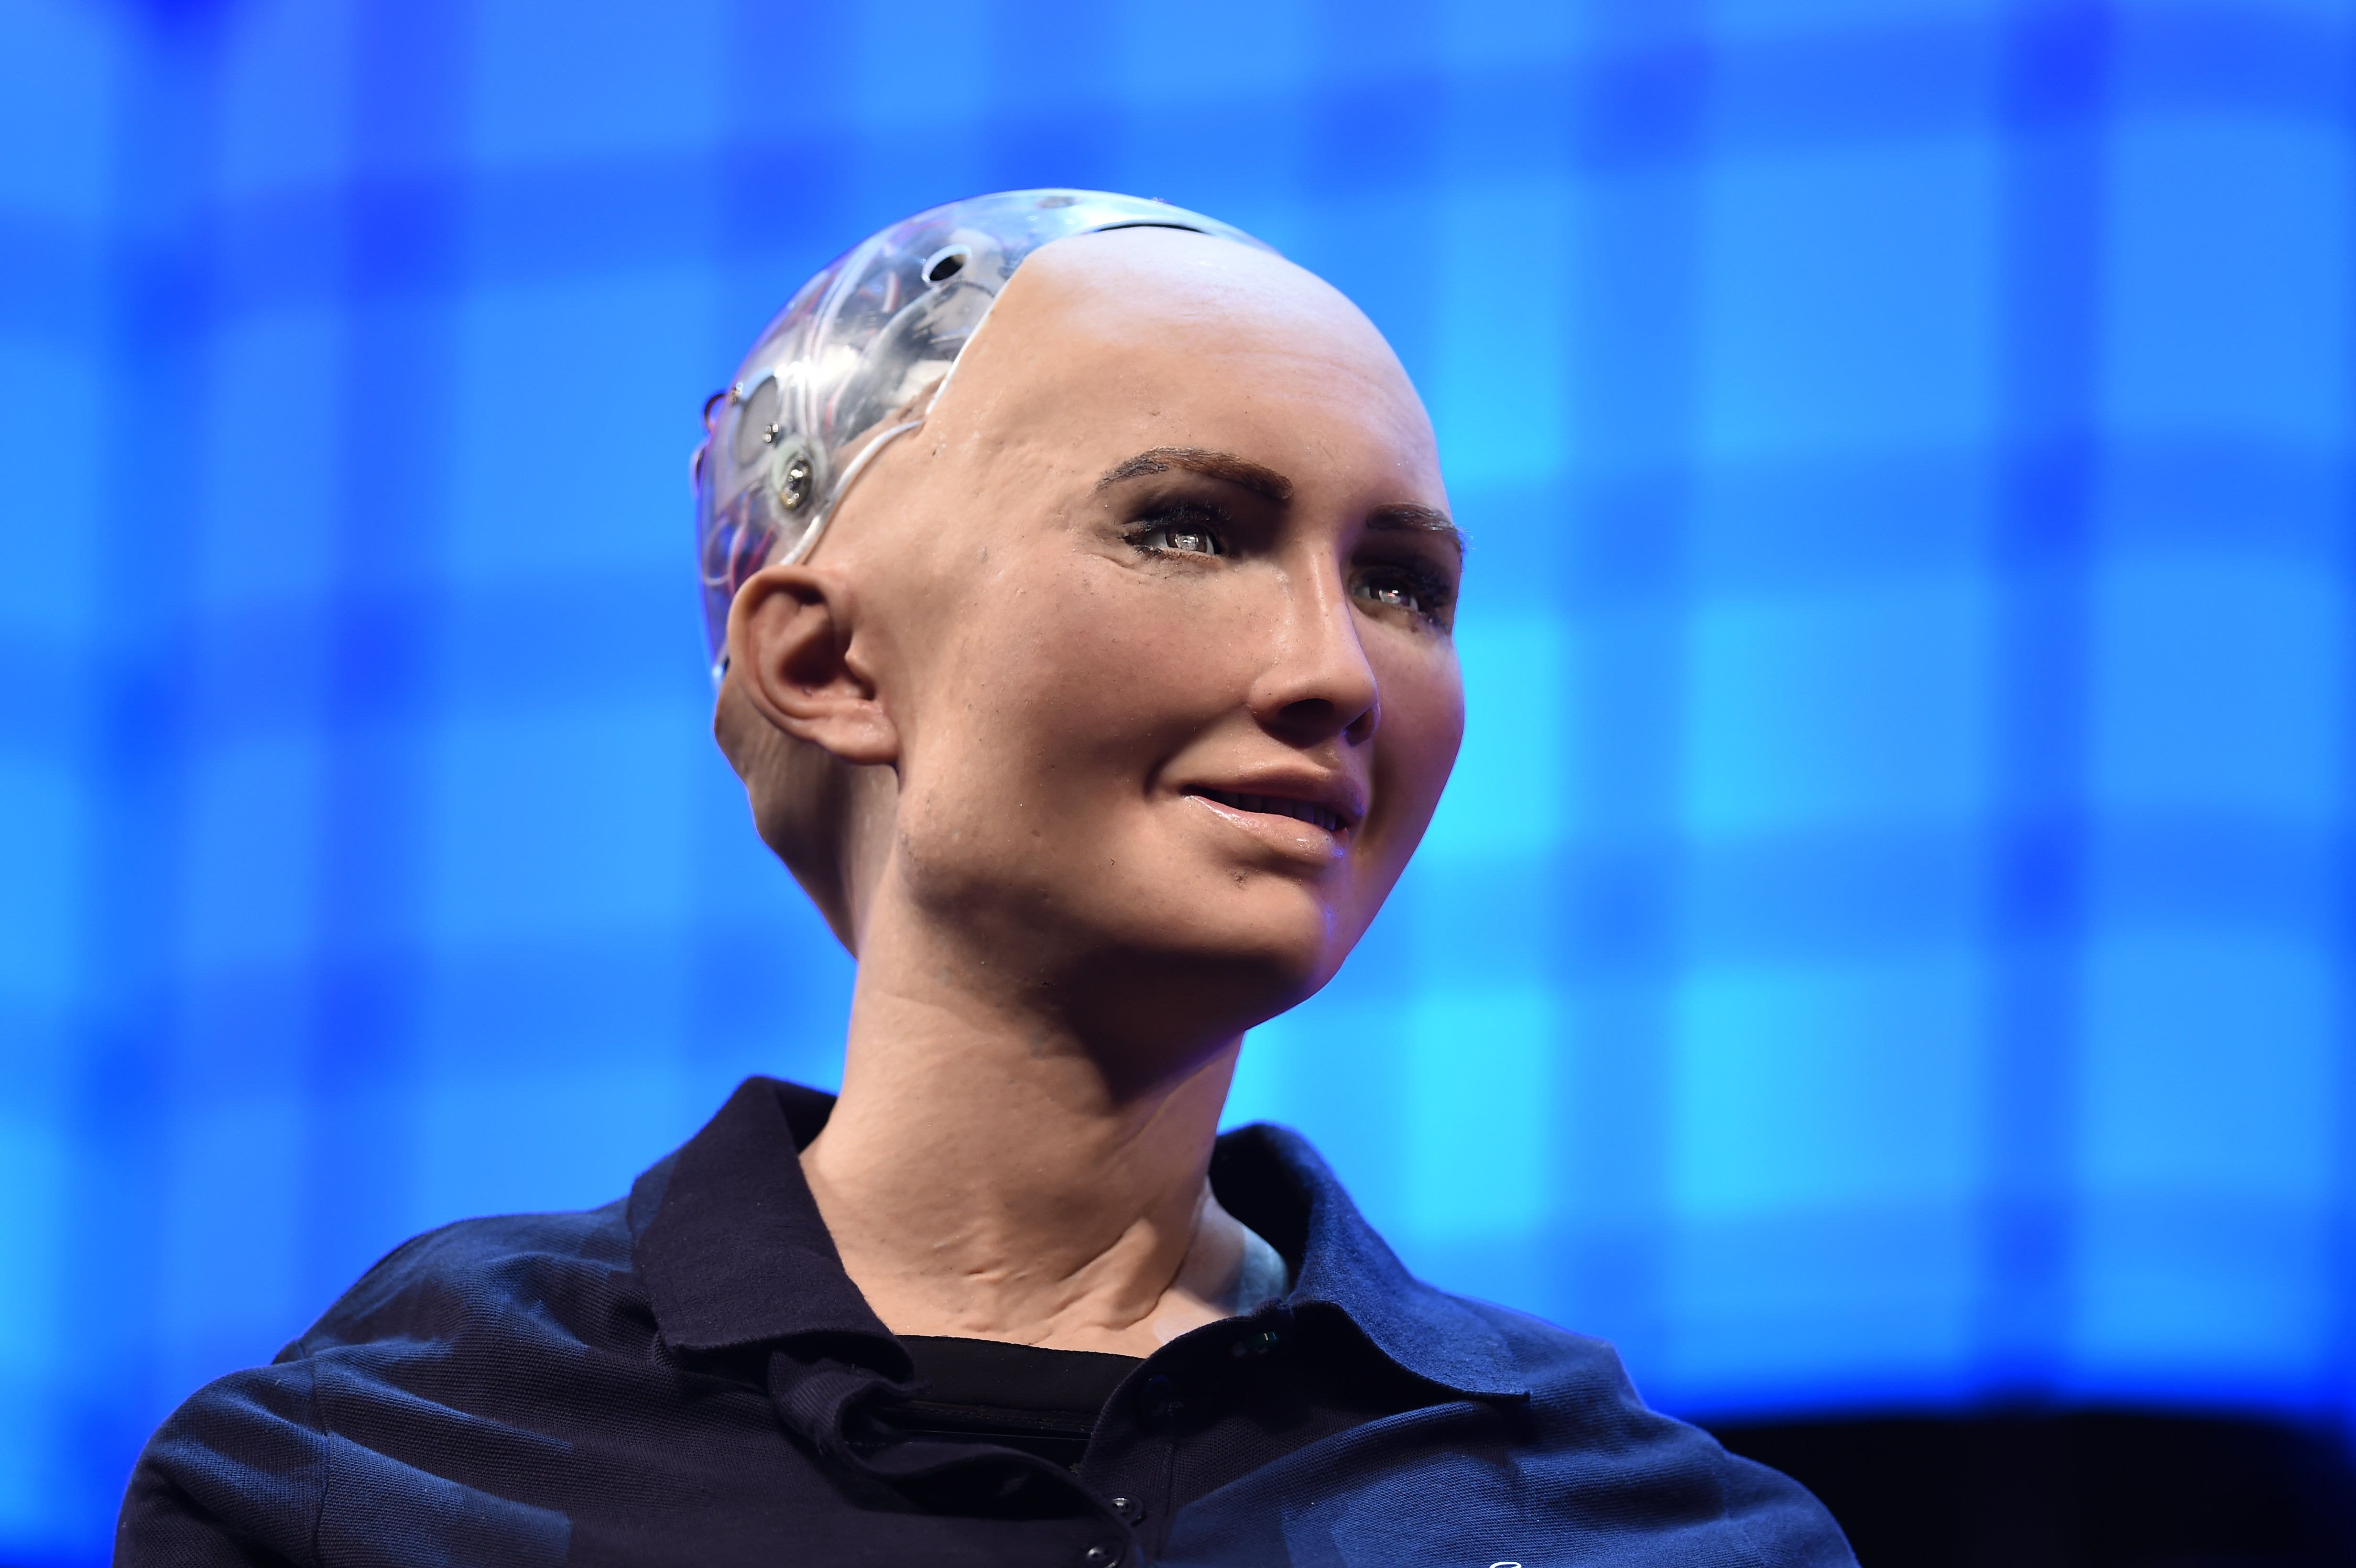 Why Should Humans Have All The Fun? Sophia The Robot Is Selling Her Art As NFT